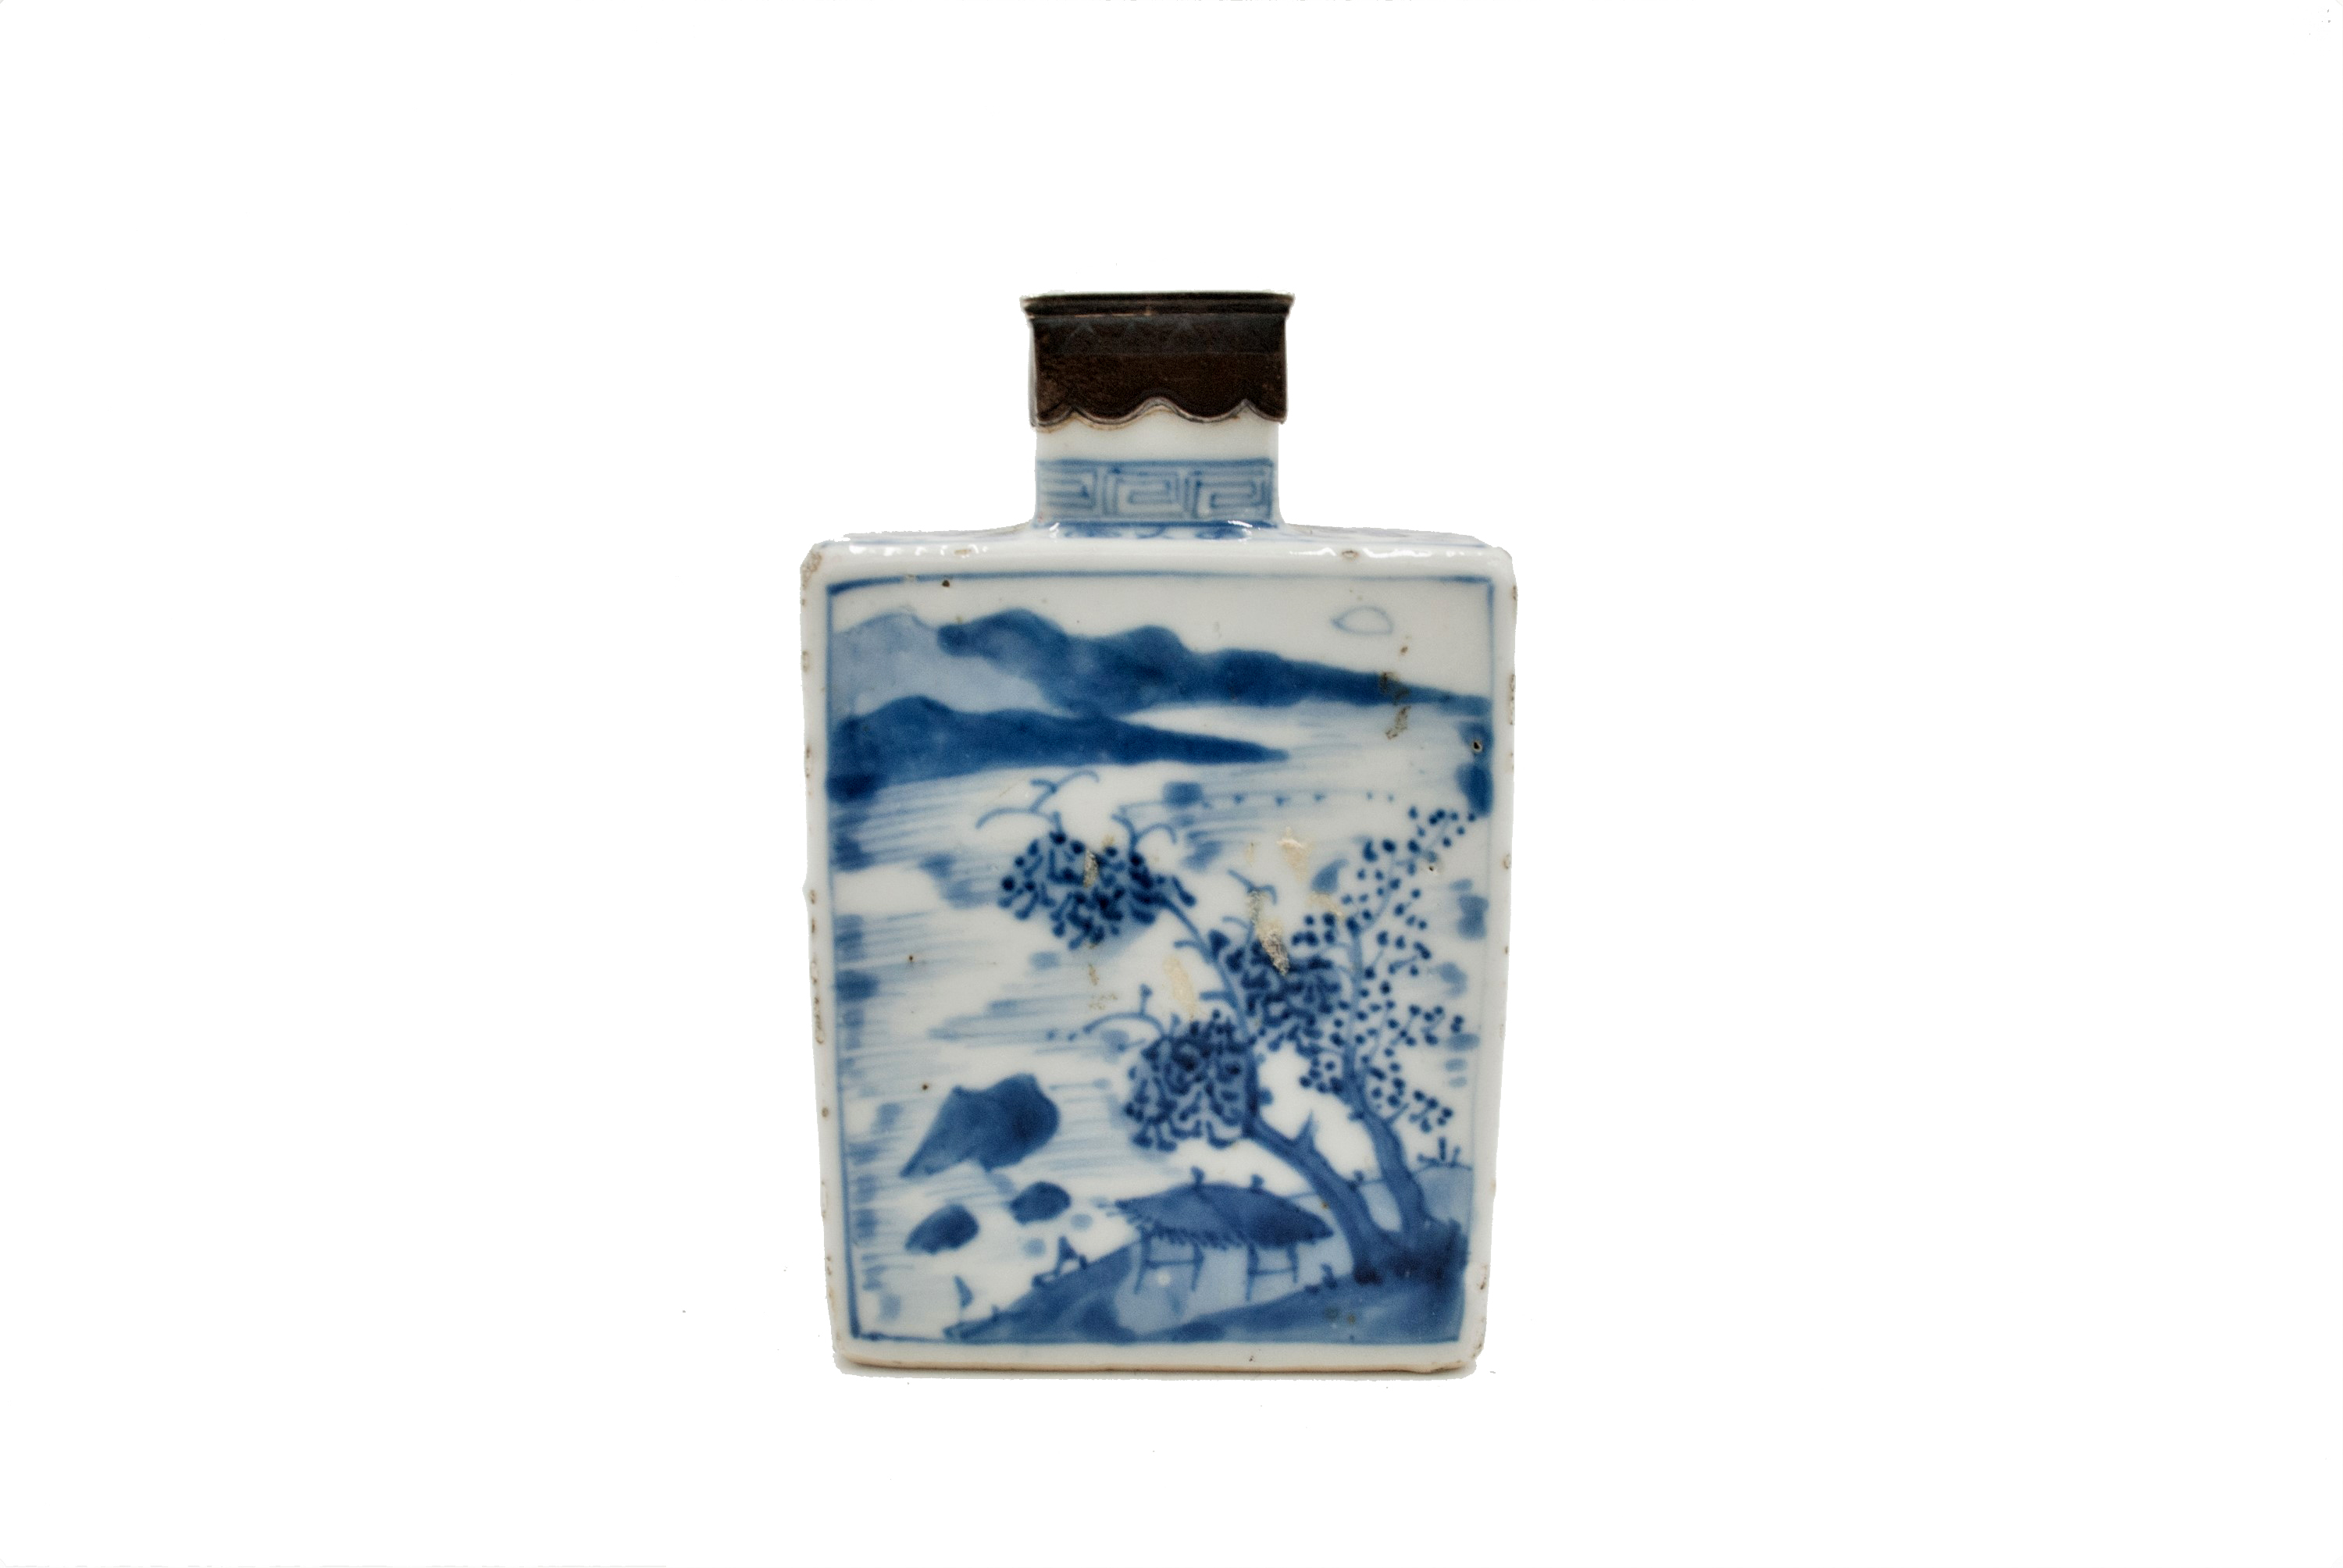 A Chinese blue and white porcelain tea caddy, 18th century, with white metal mount,